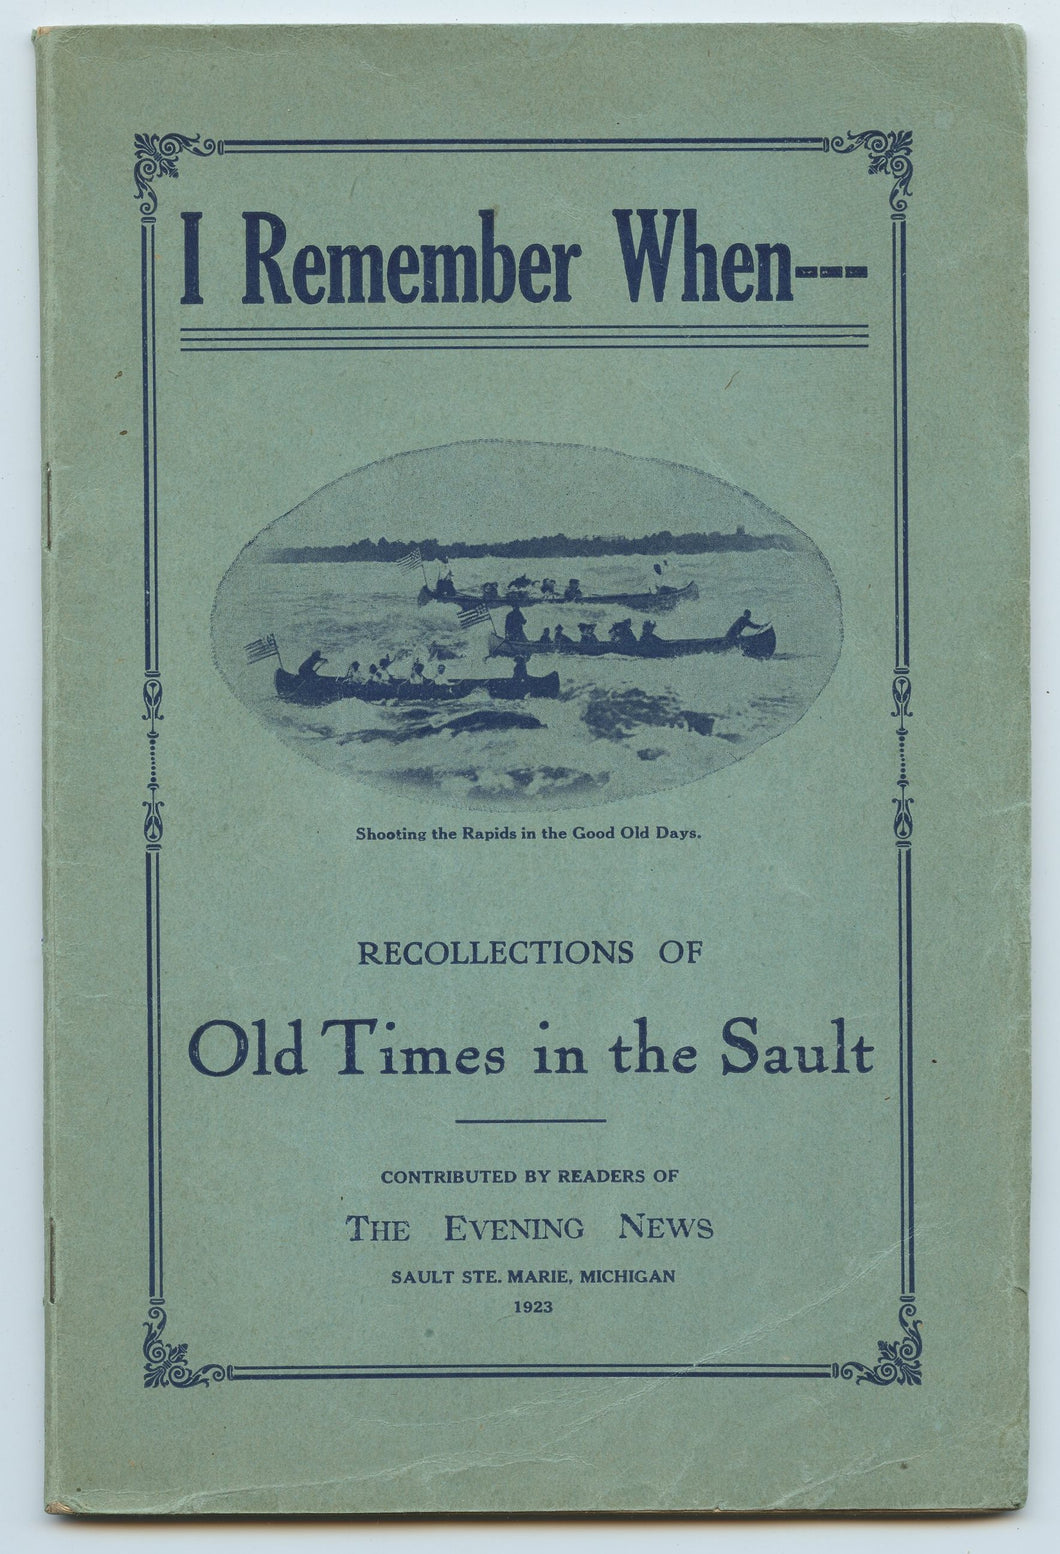 I Remember When - Recollections of Old Times in the Sault